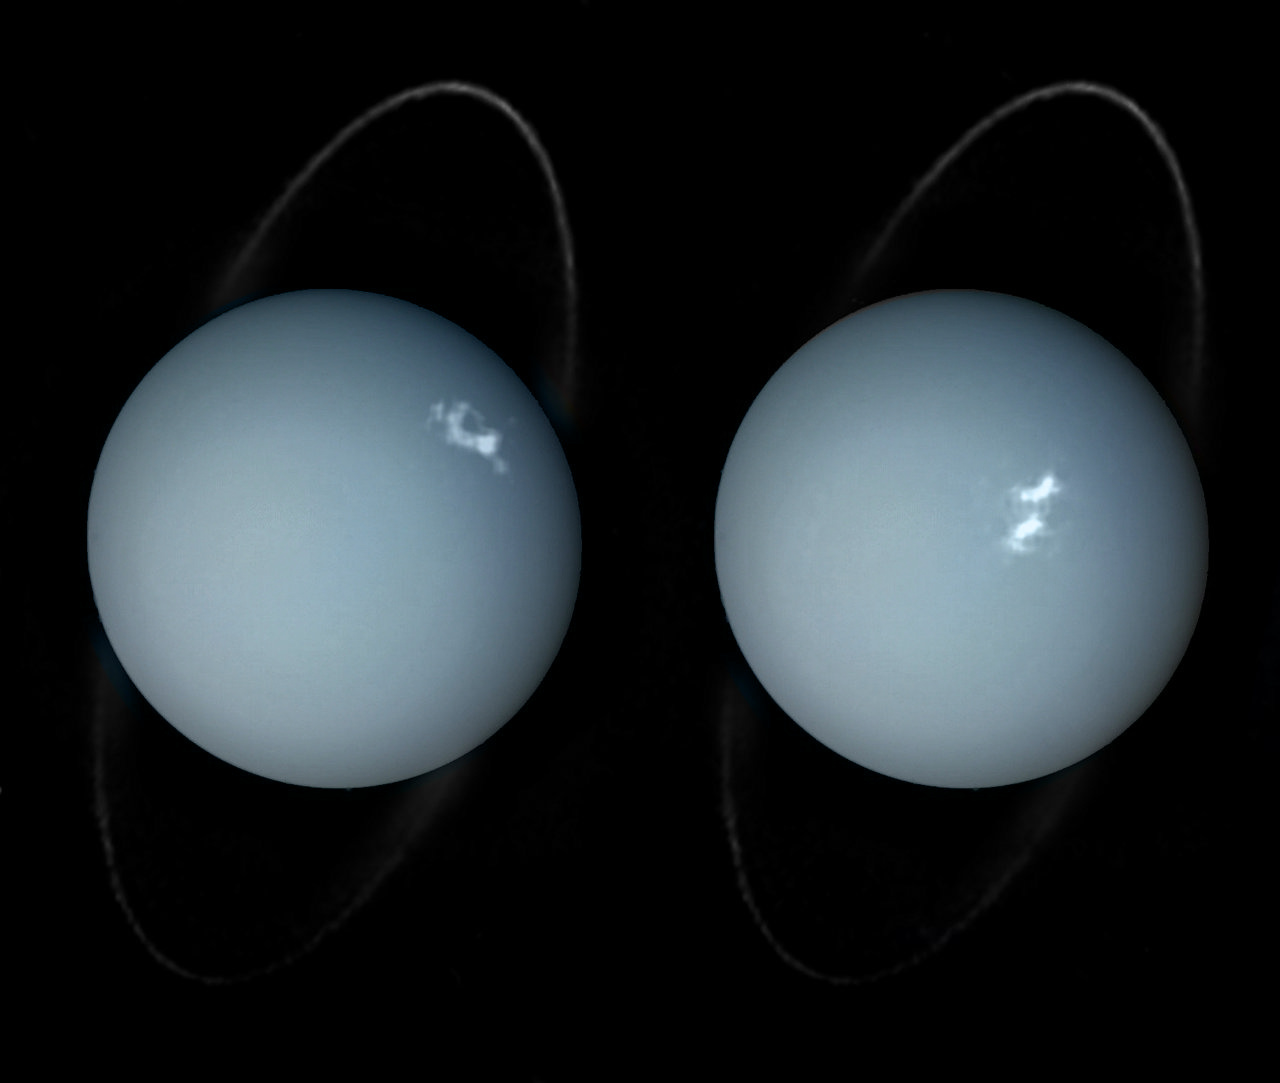 <p><span>A study published in 2022 suggested that extra methane in Uranus' atmosphere was the likely driver behind the planet’s lighter and hazier blue color. Unfortunately, that has left the world with a dull impression of the planet. </span></p> <p>Photo Credit: Wiki Commons By ESA/Hubble & NASA, L. Lam, CC BY 4.0</p>